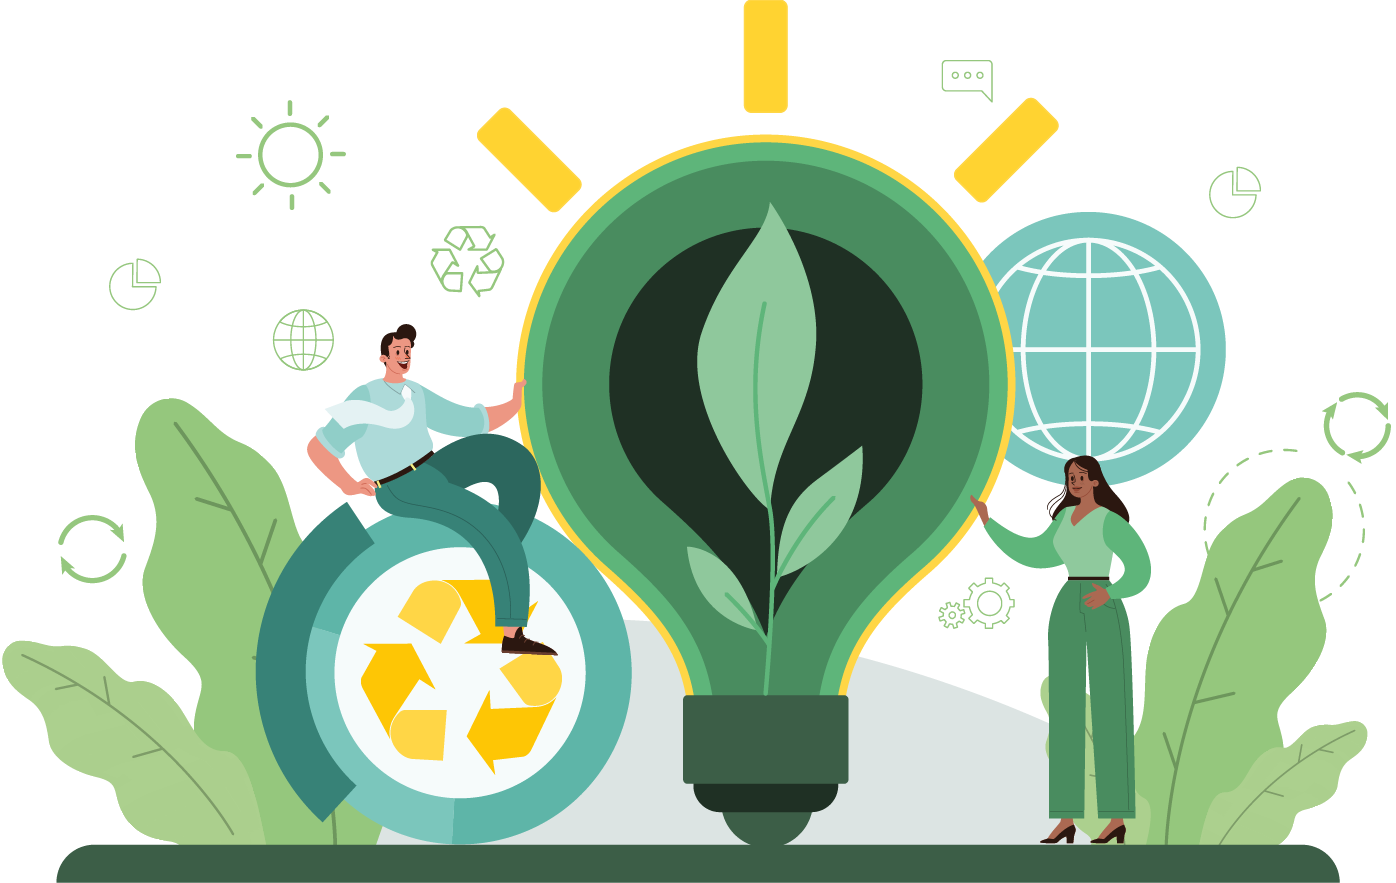 Light bulb with green leaf symbolising green ideas, recycling logo and two people interacting.